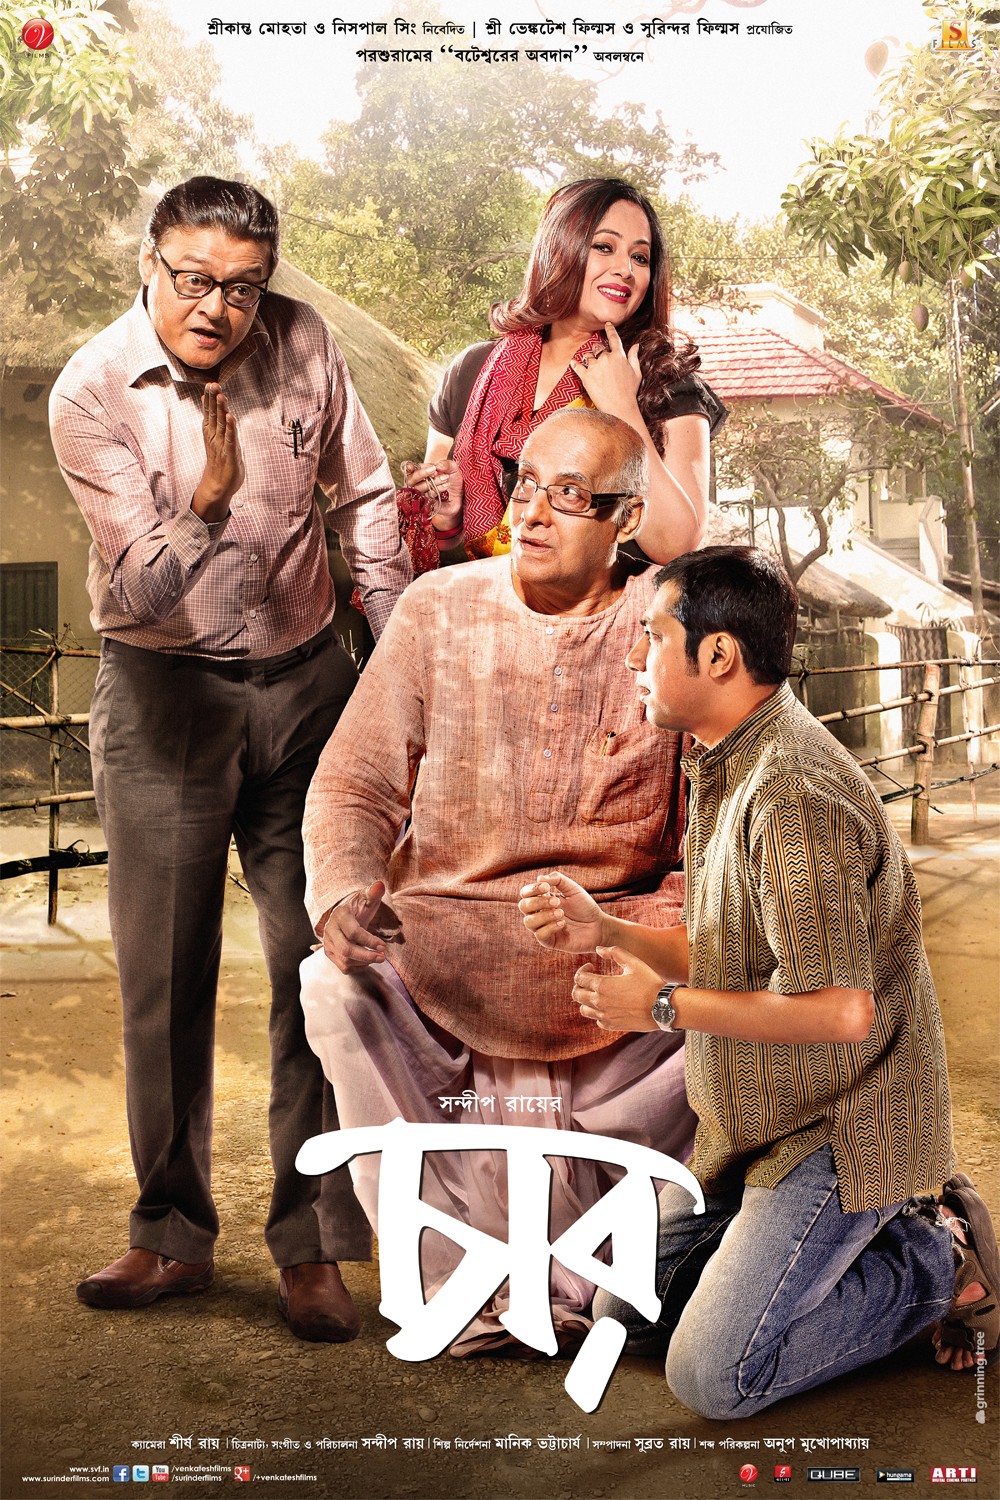 Extra Large Movie Poster Image for Chaar (#4 of 11)